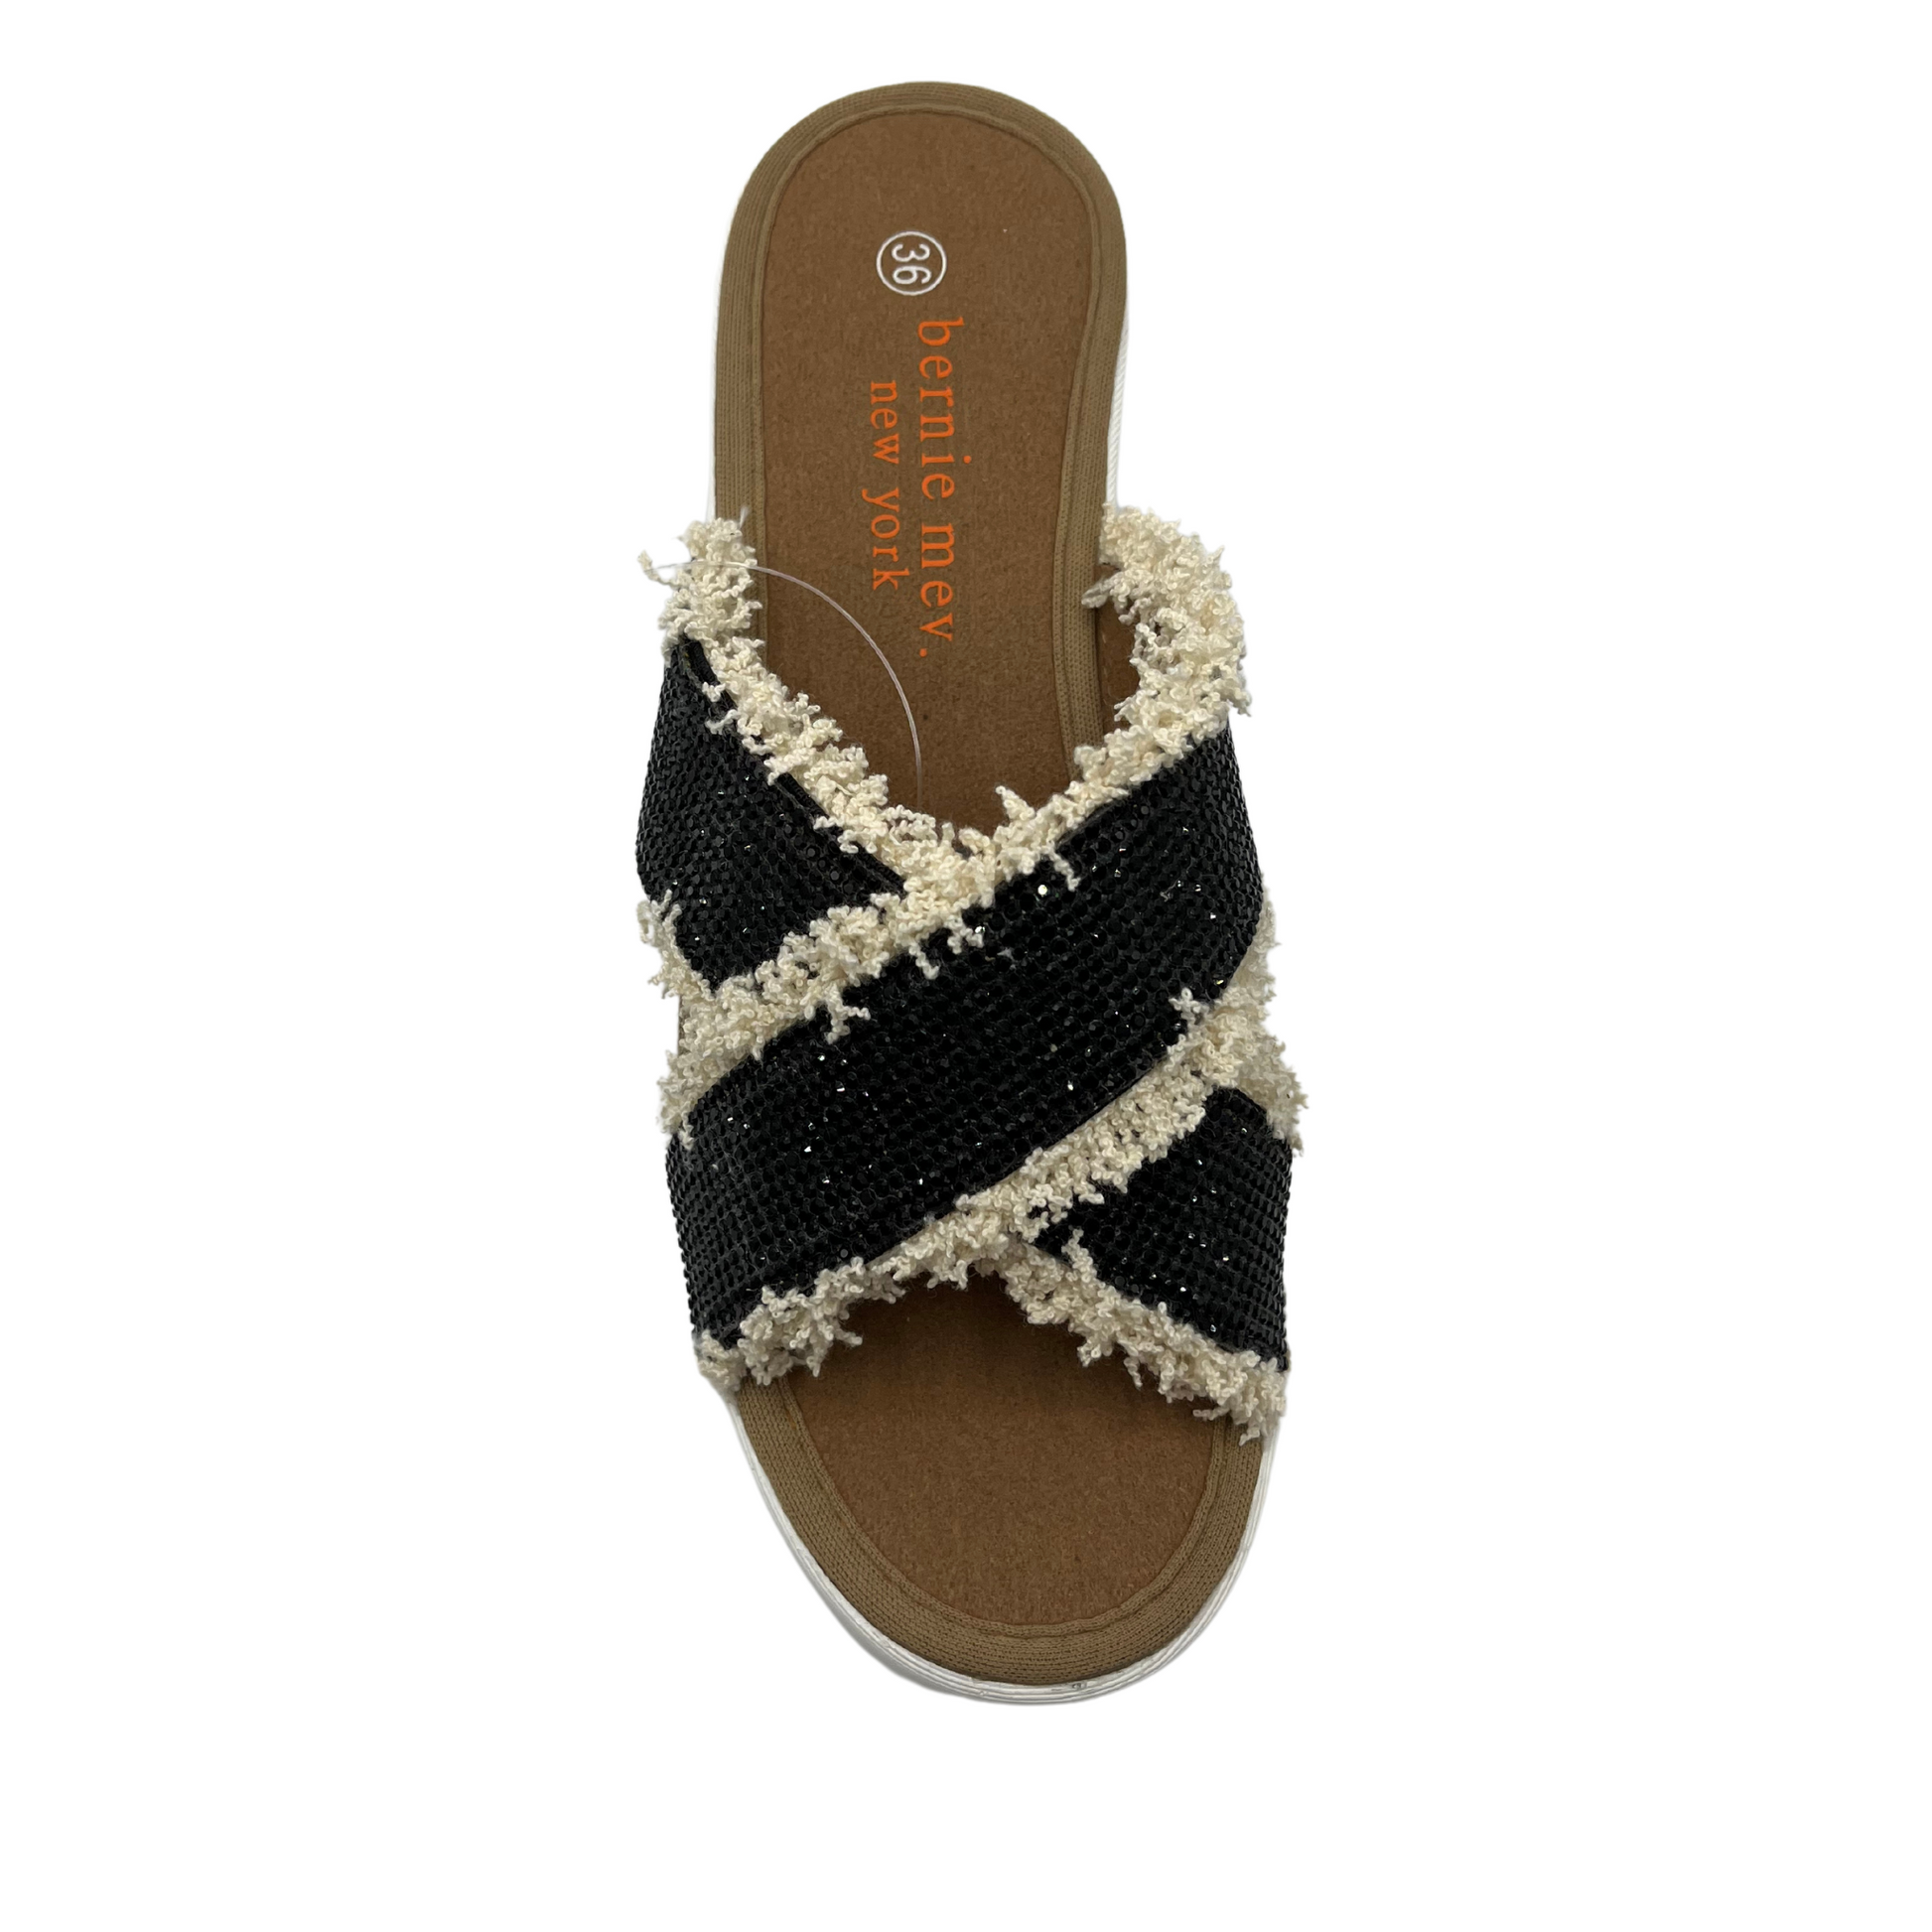 Top view of black rhinestone strapped sandals with fringe detail and white wedge heel